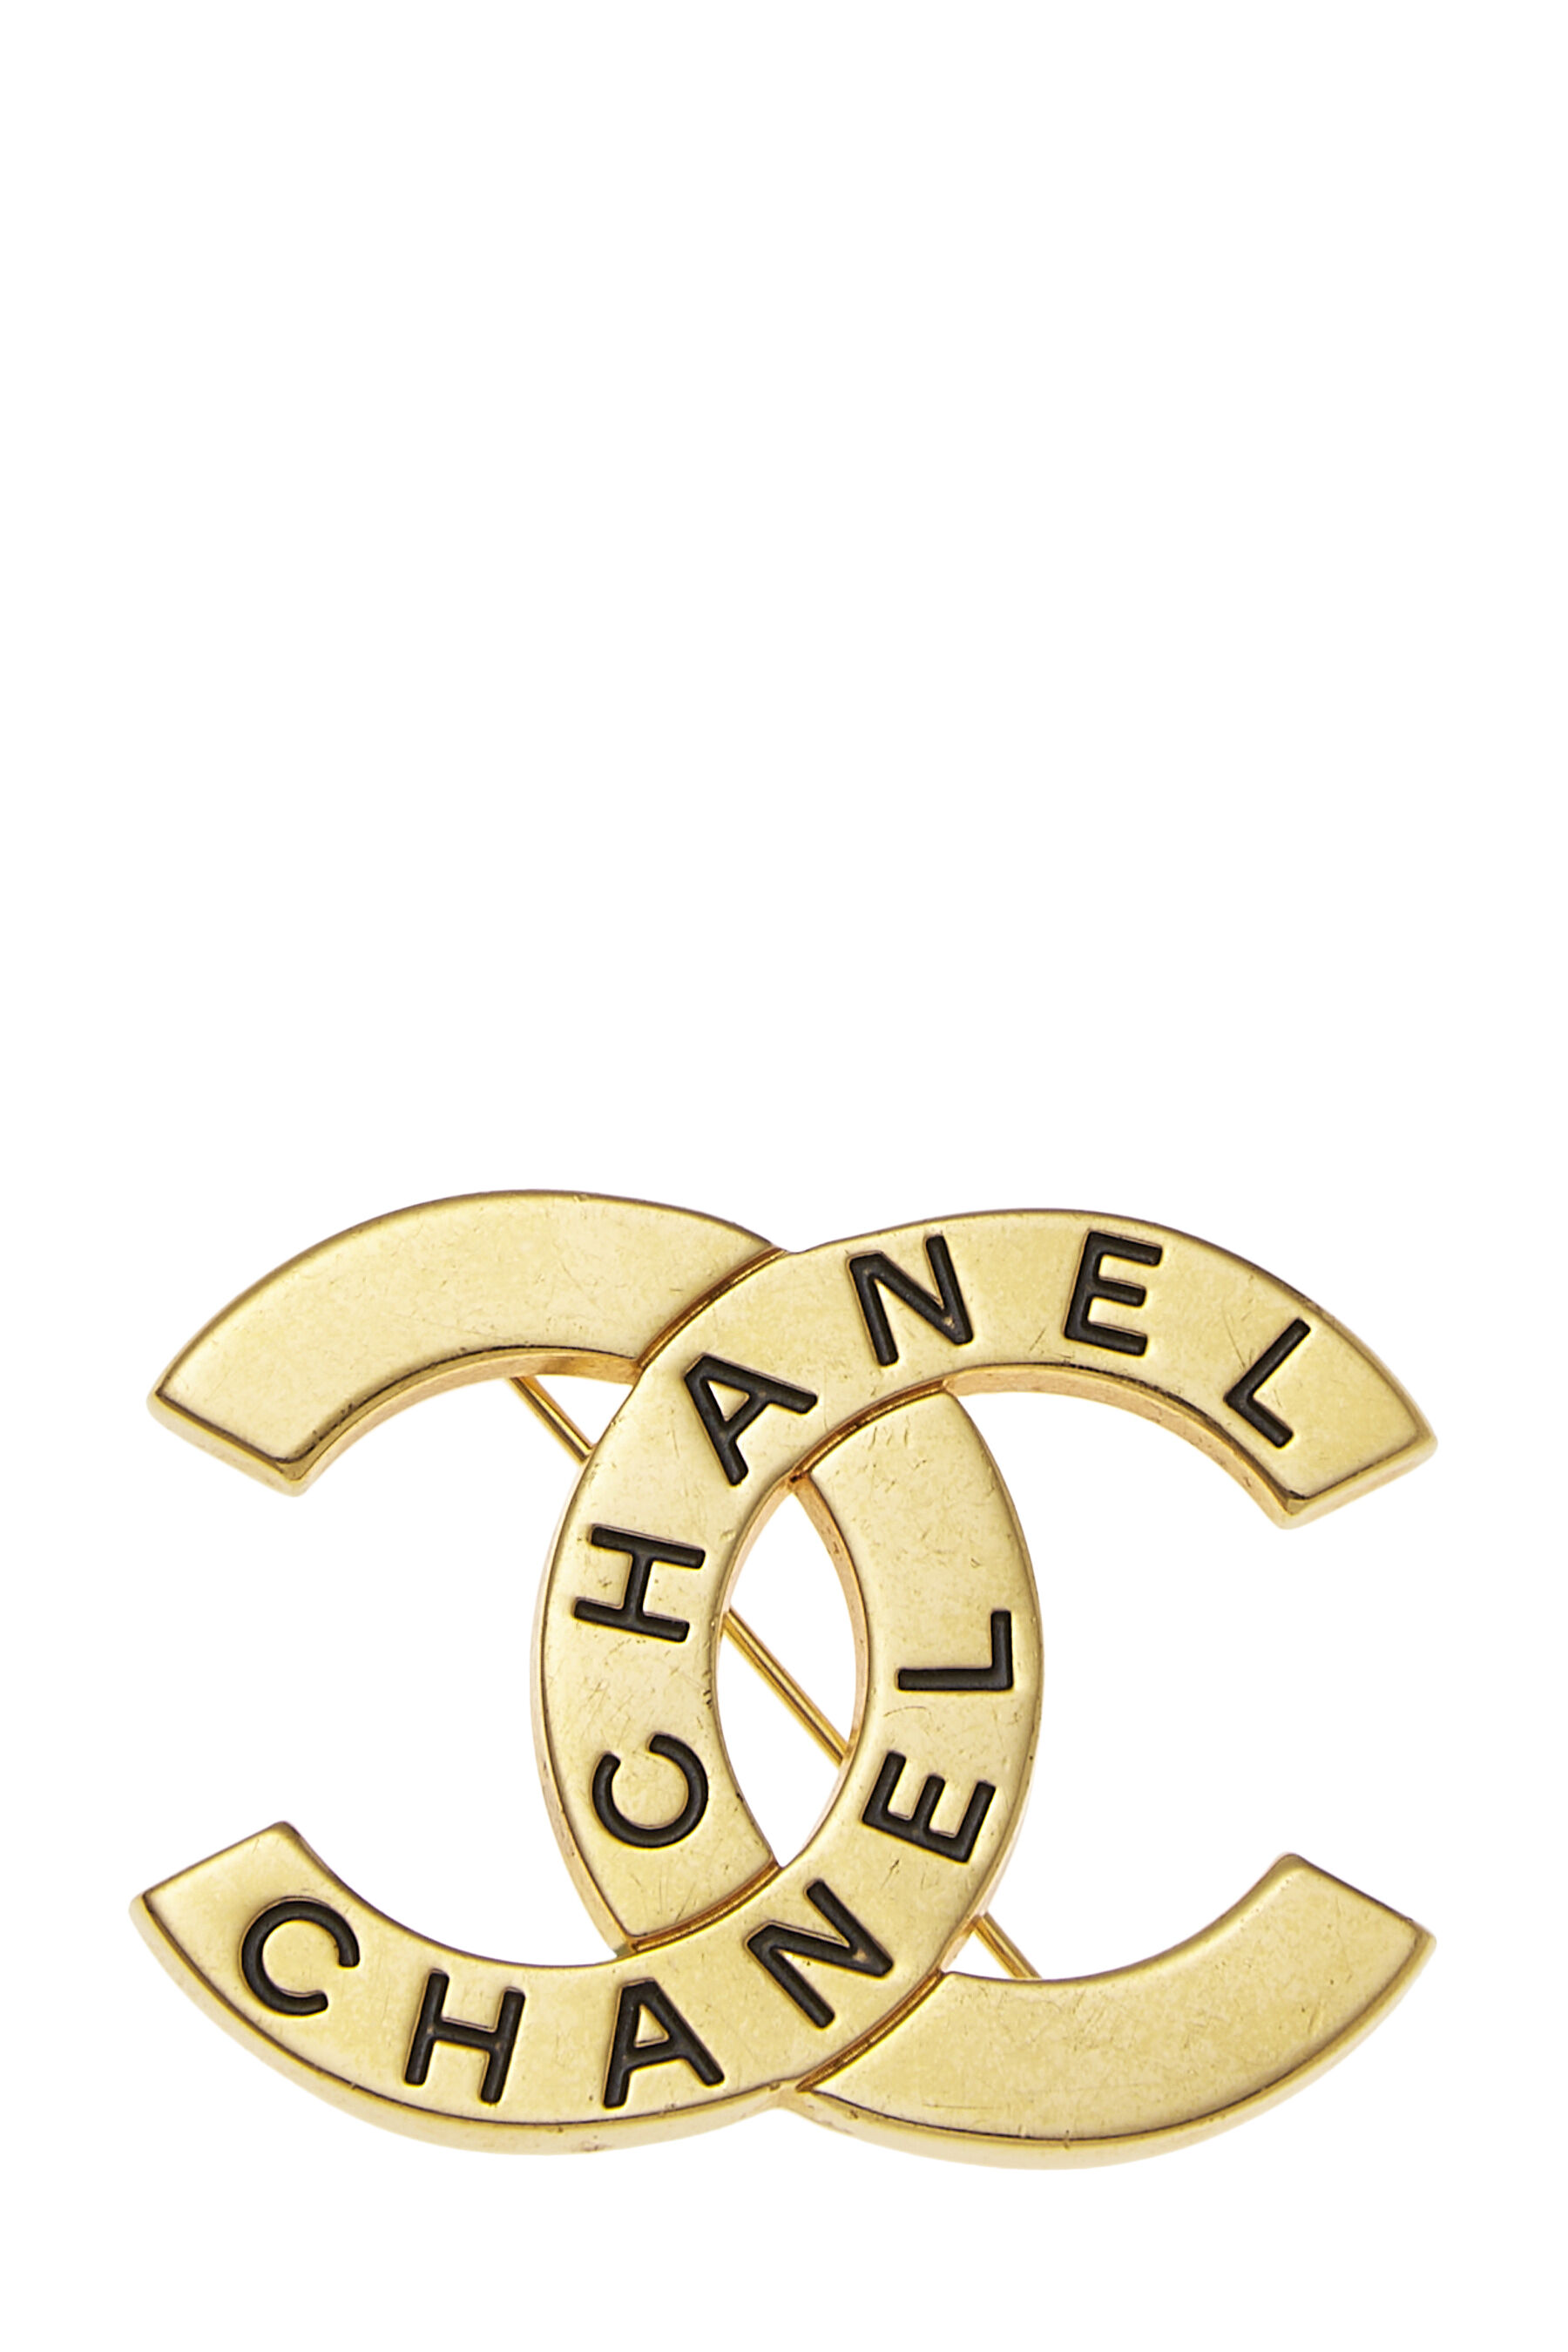 Pin on chanel ♥ chanel